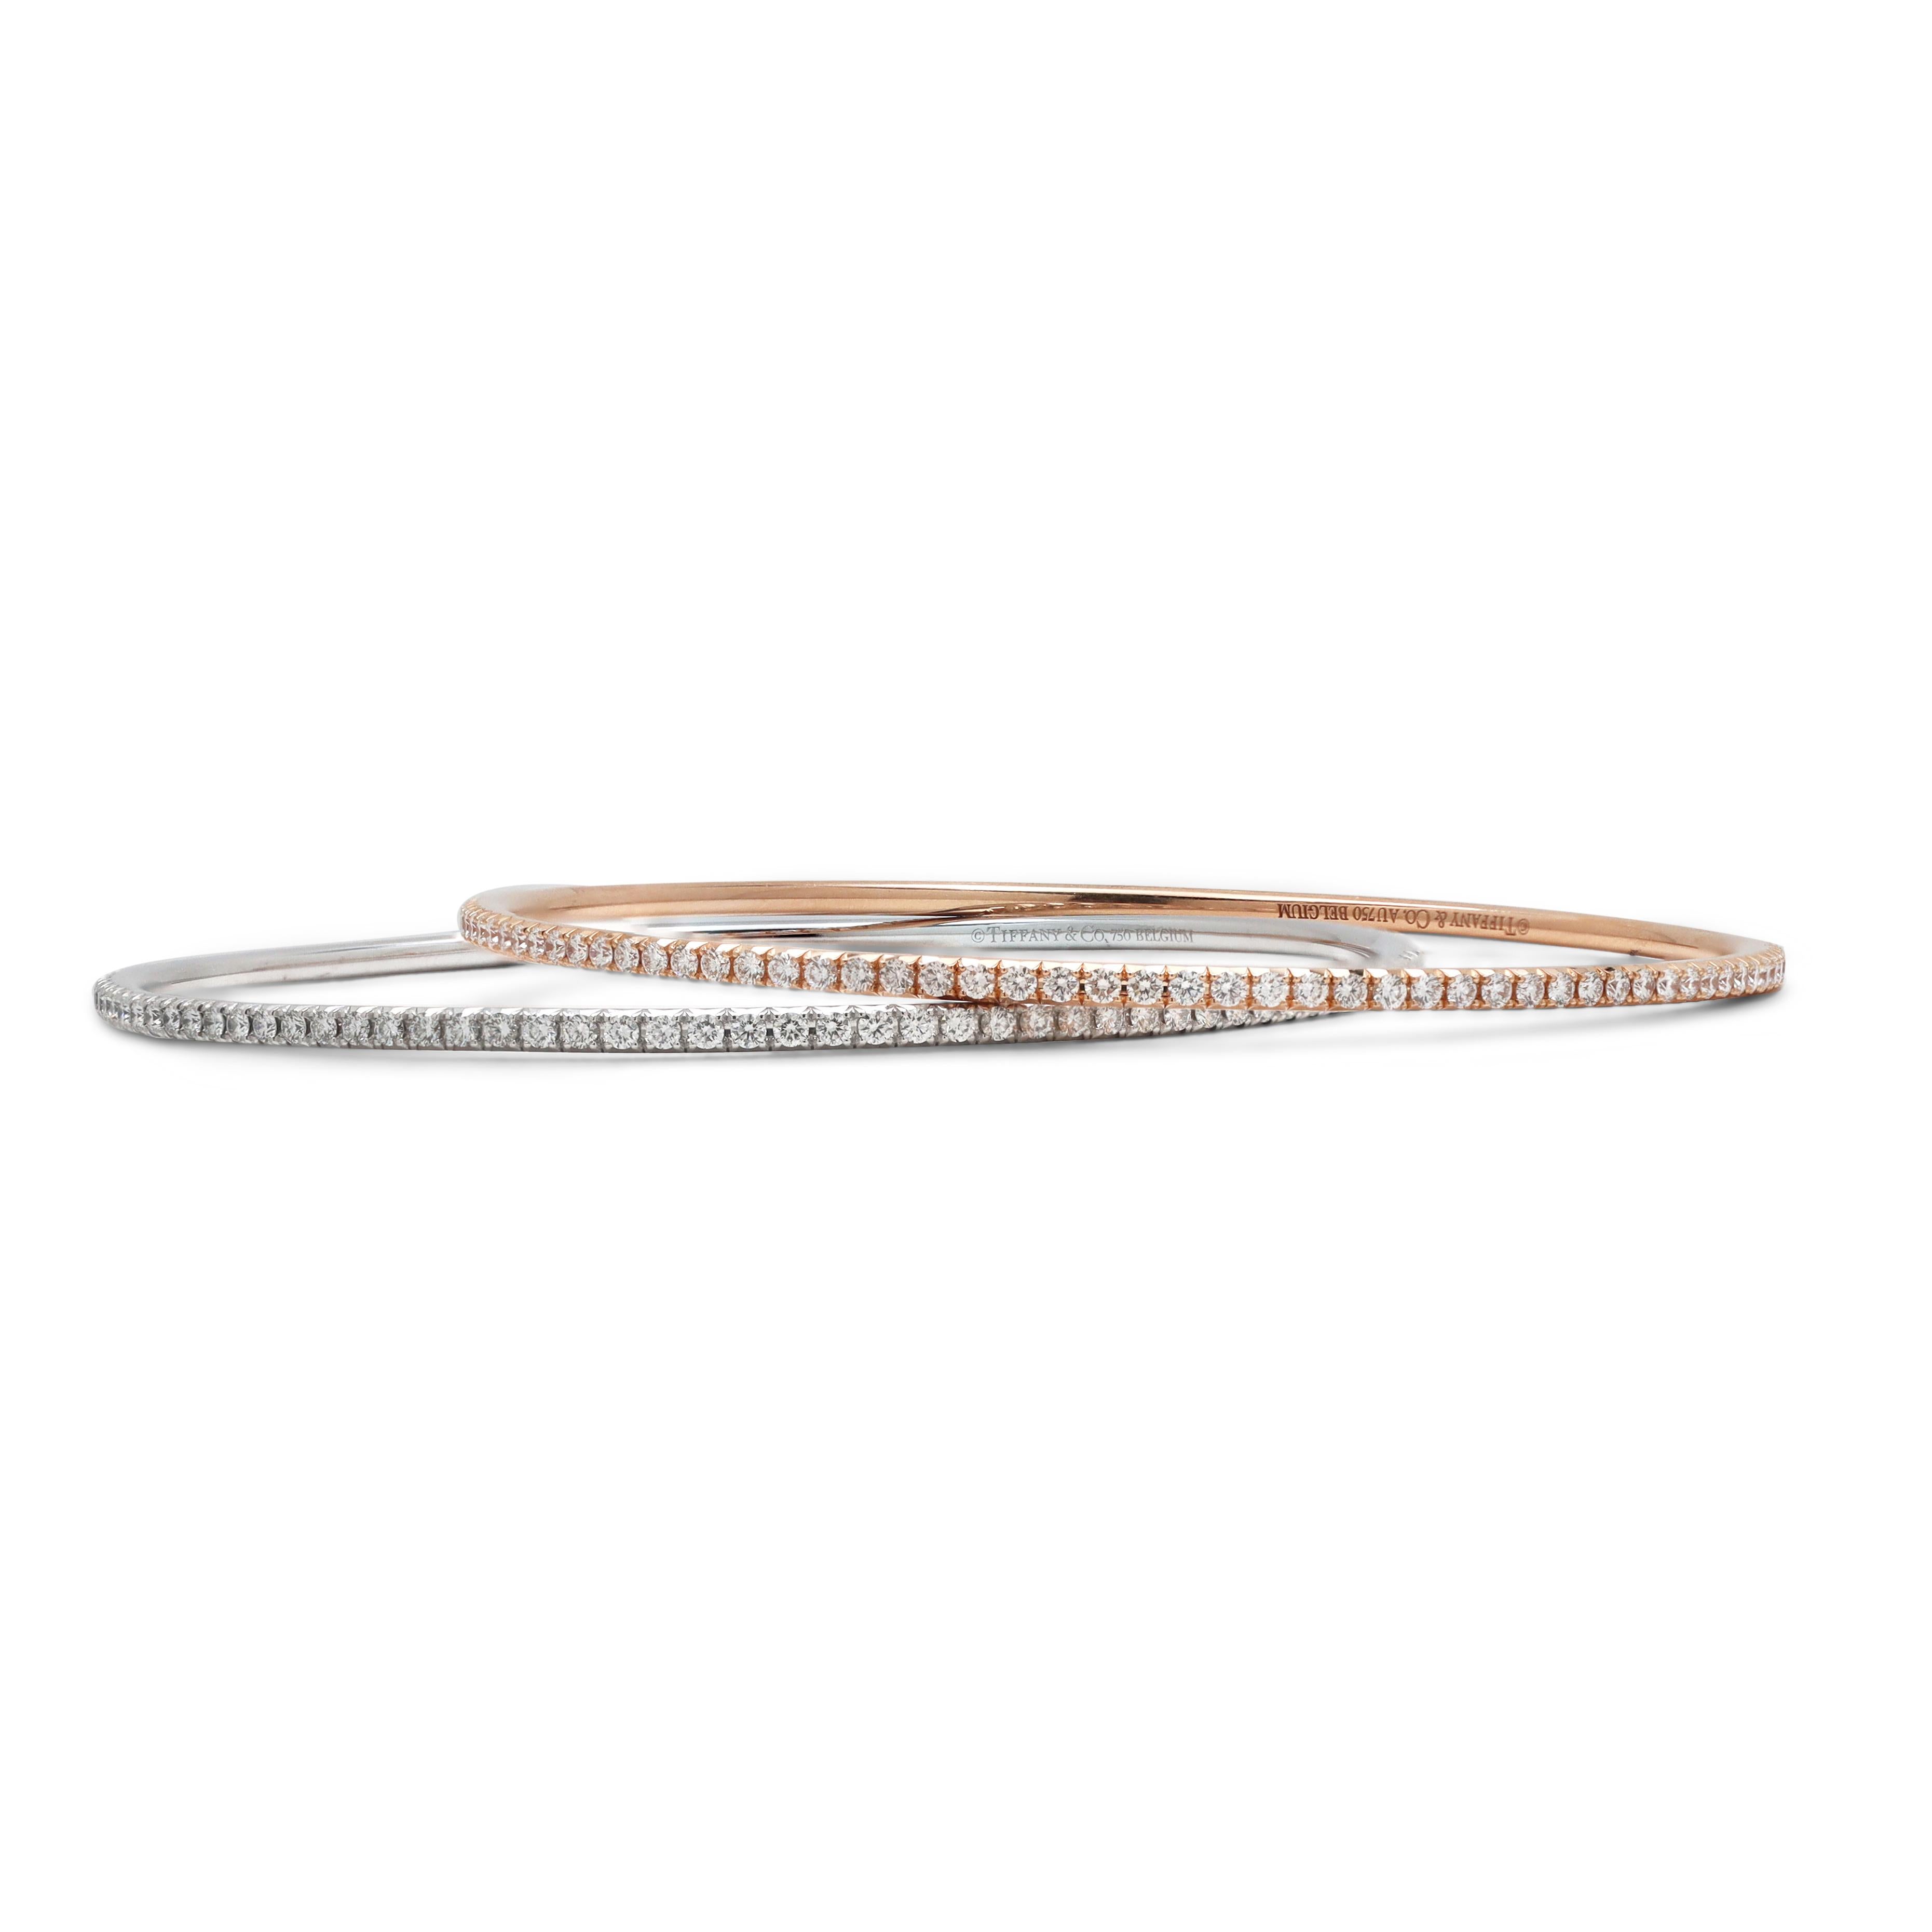 Authentic Tiffany & Co. 'Metro' bracelet crafted in 18 karat white gold and set with glittering round brilliant cut diamonds weighing an estimated 1.65 carats total weight (G-J color range, IF-SI1 clarity range). Will fit up to an 8-inch wrist.